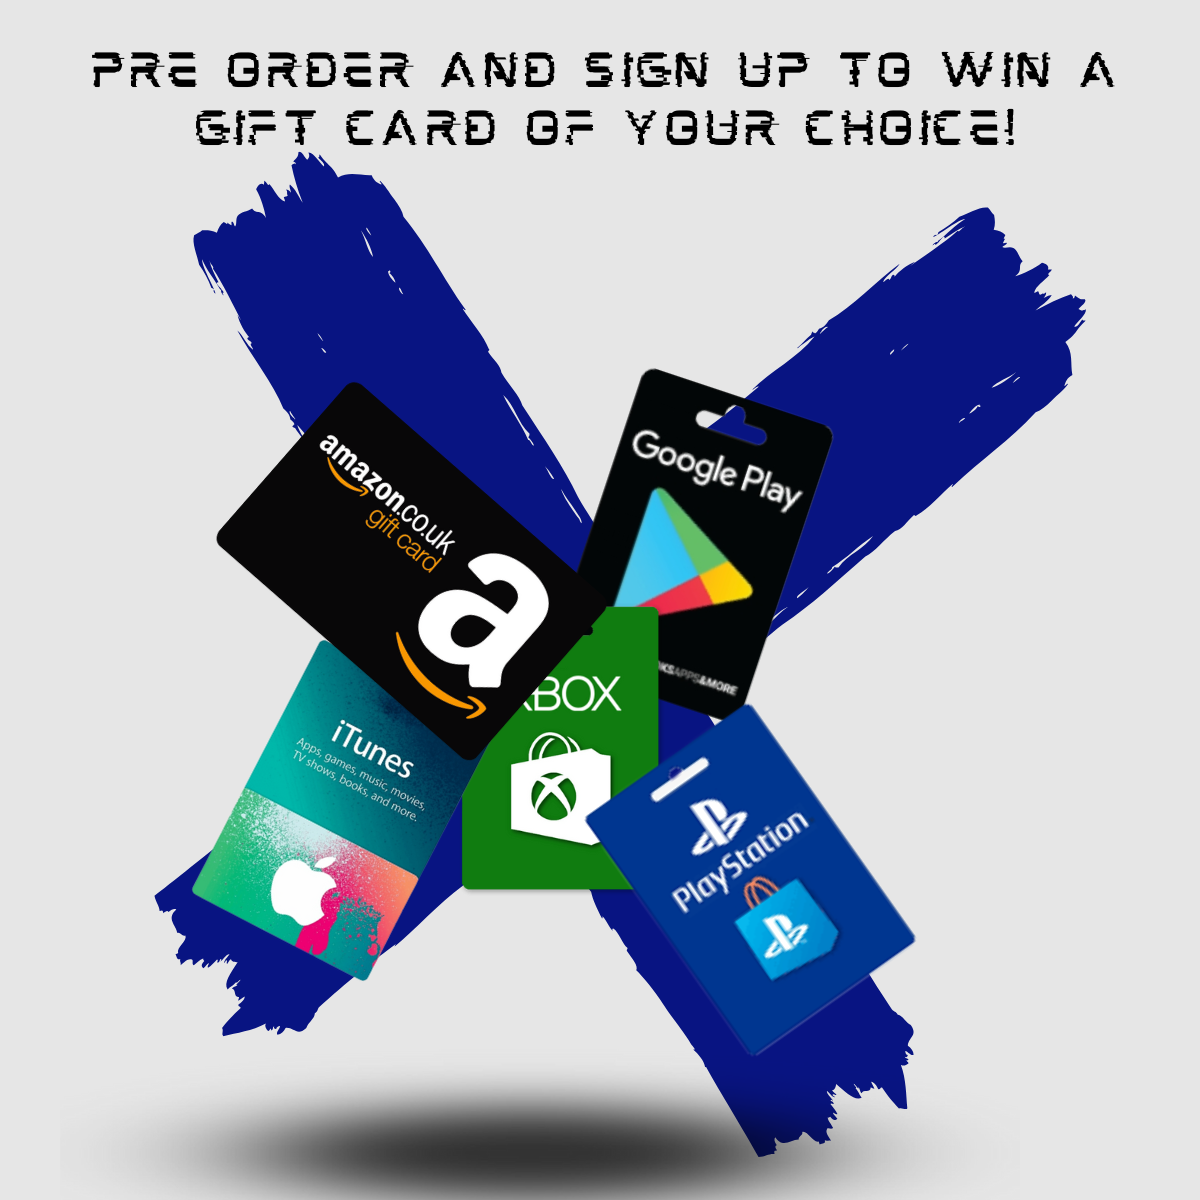 176-pre-order-and-sign-up-towin-a-gift-card-of-your-choice-1673122564785.png